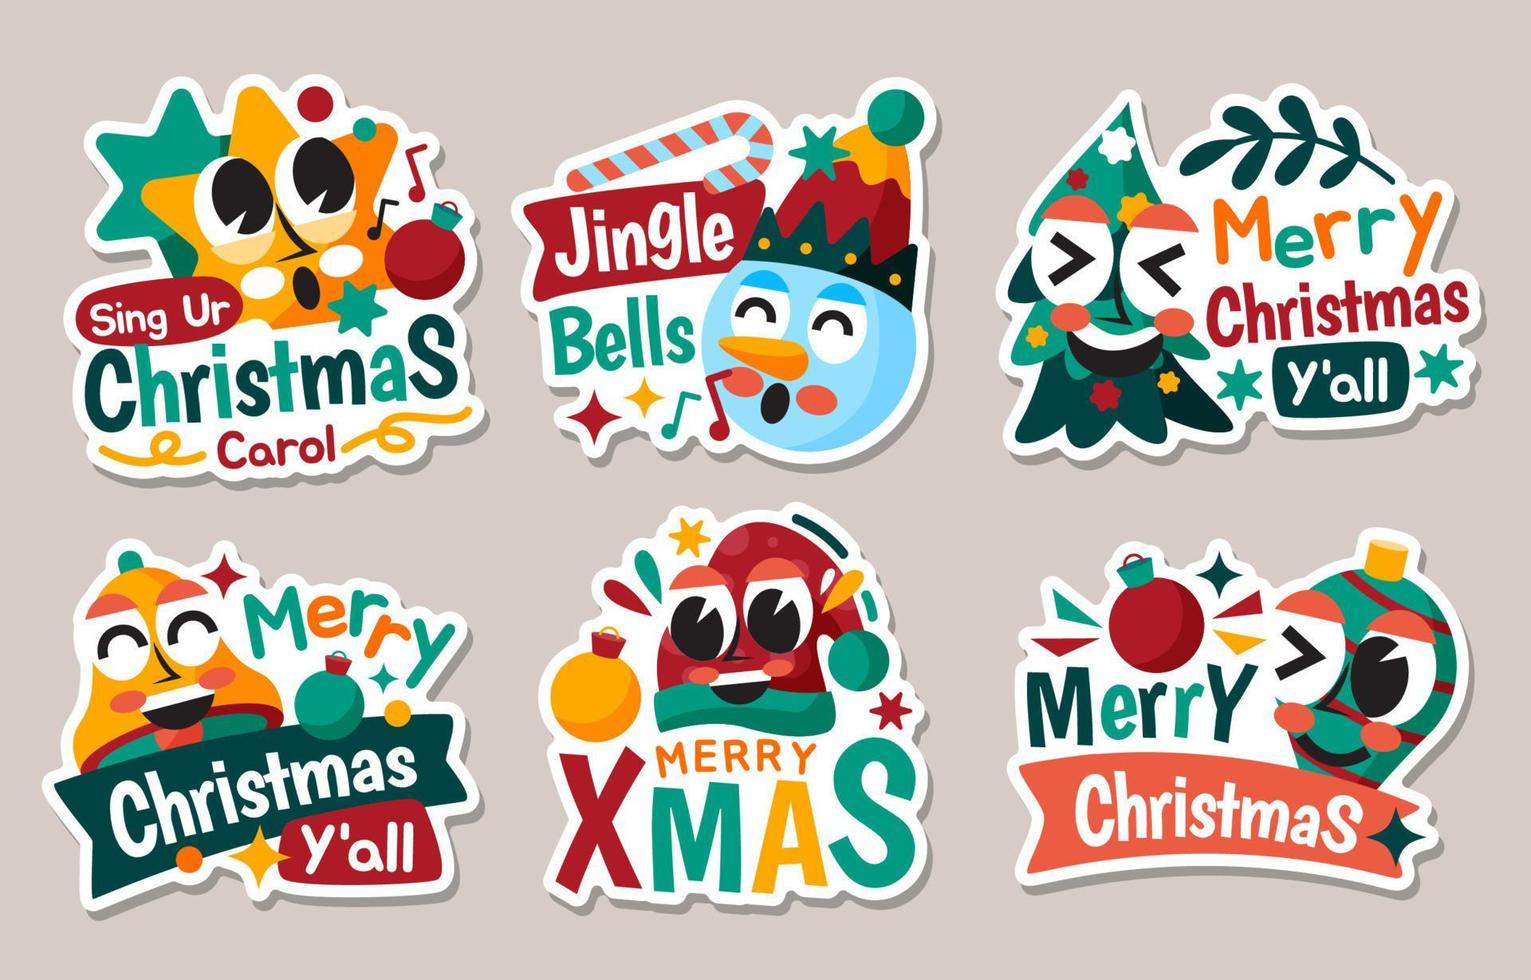 Christmas Greeting Party Sticker vector